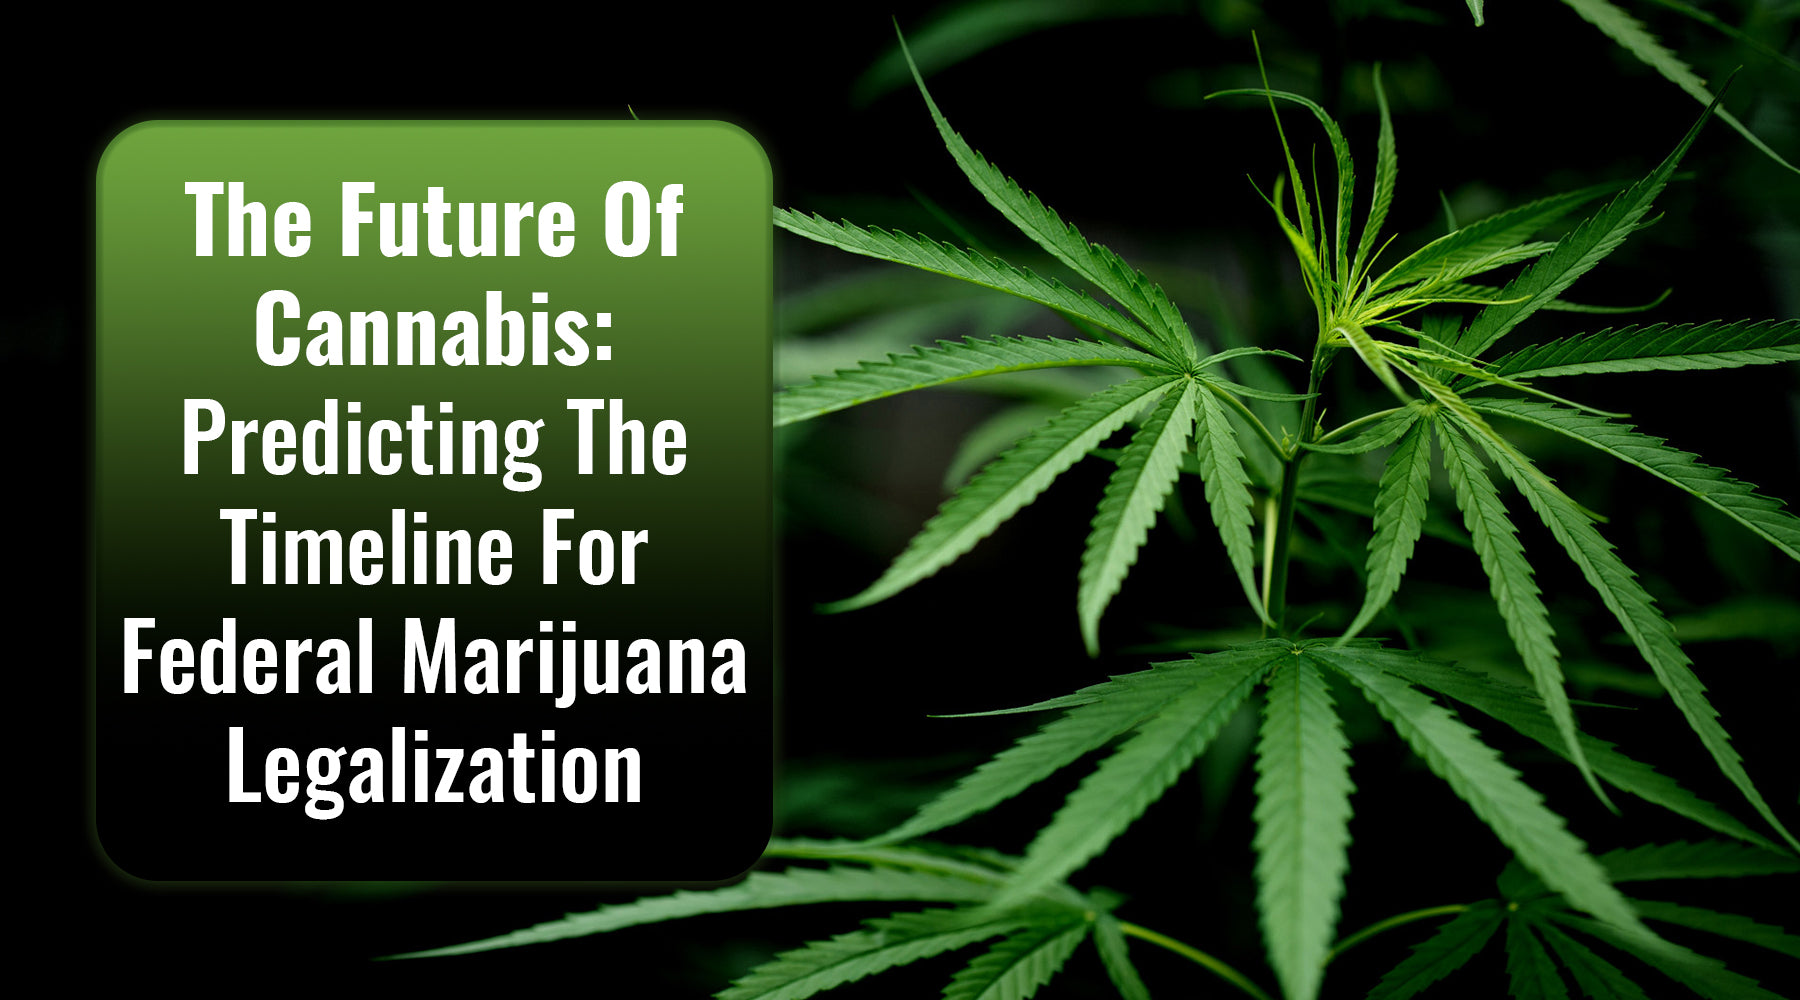 The Future of Cannabis: Predicting the Timeline for Federal Marijuana Legalization